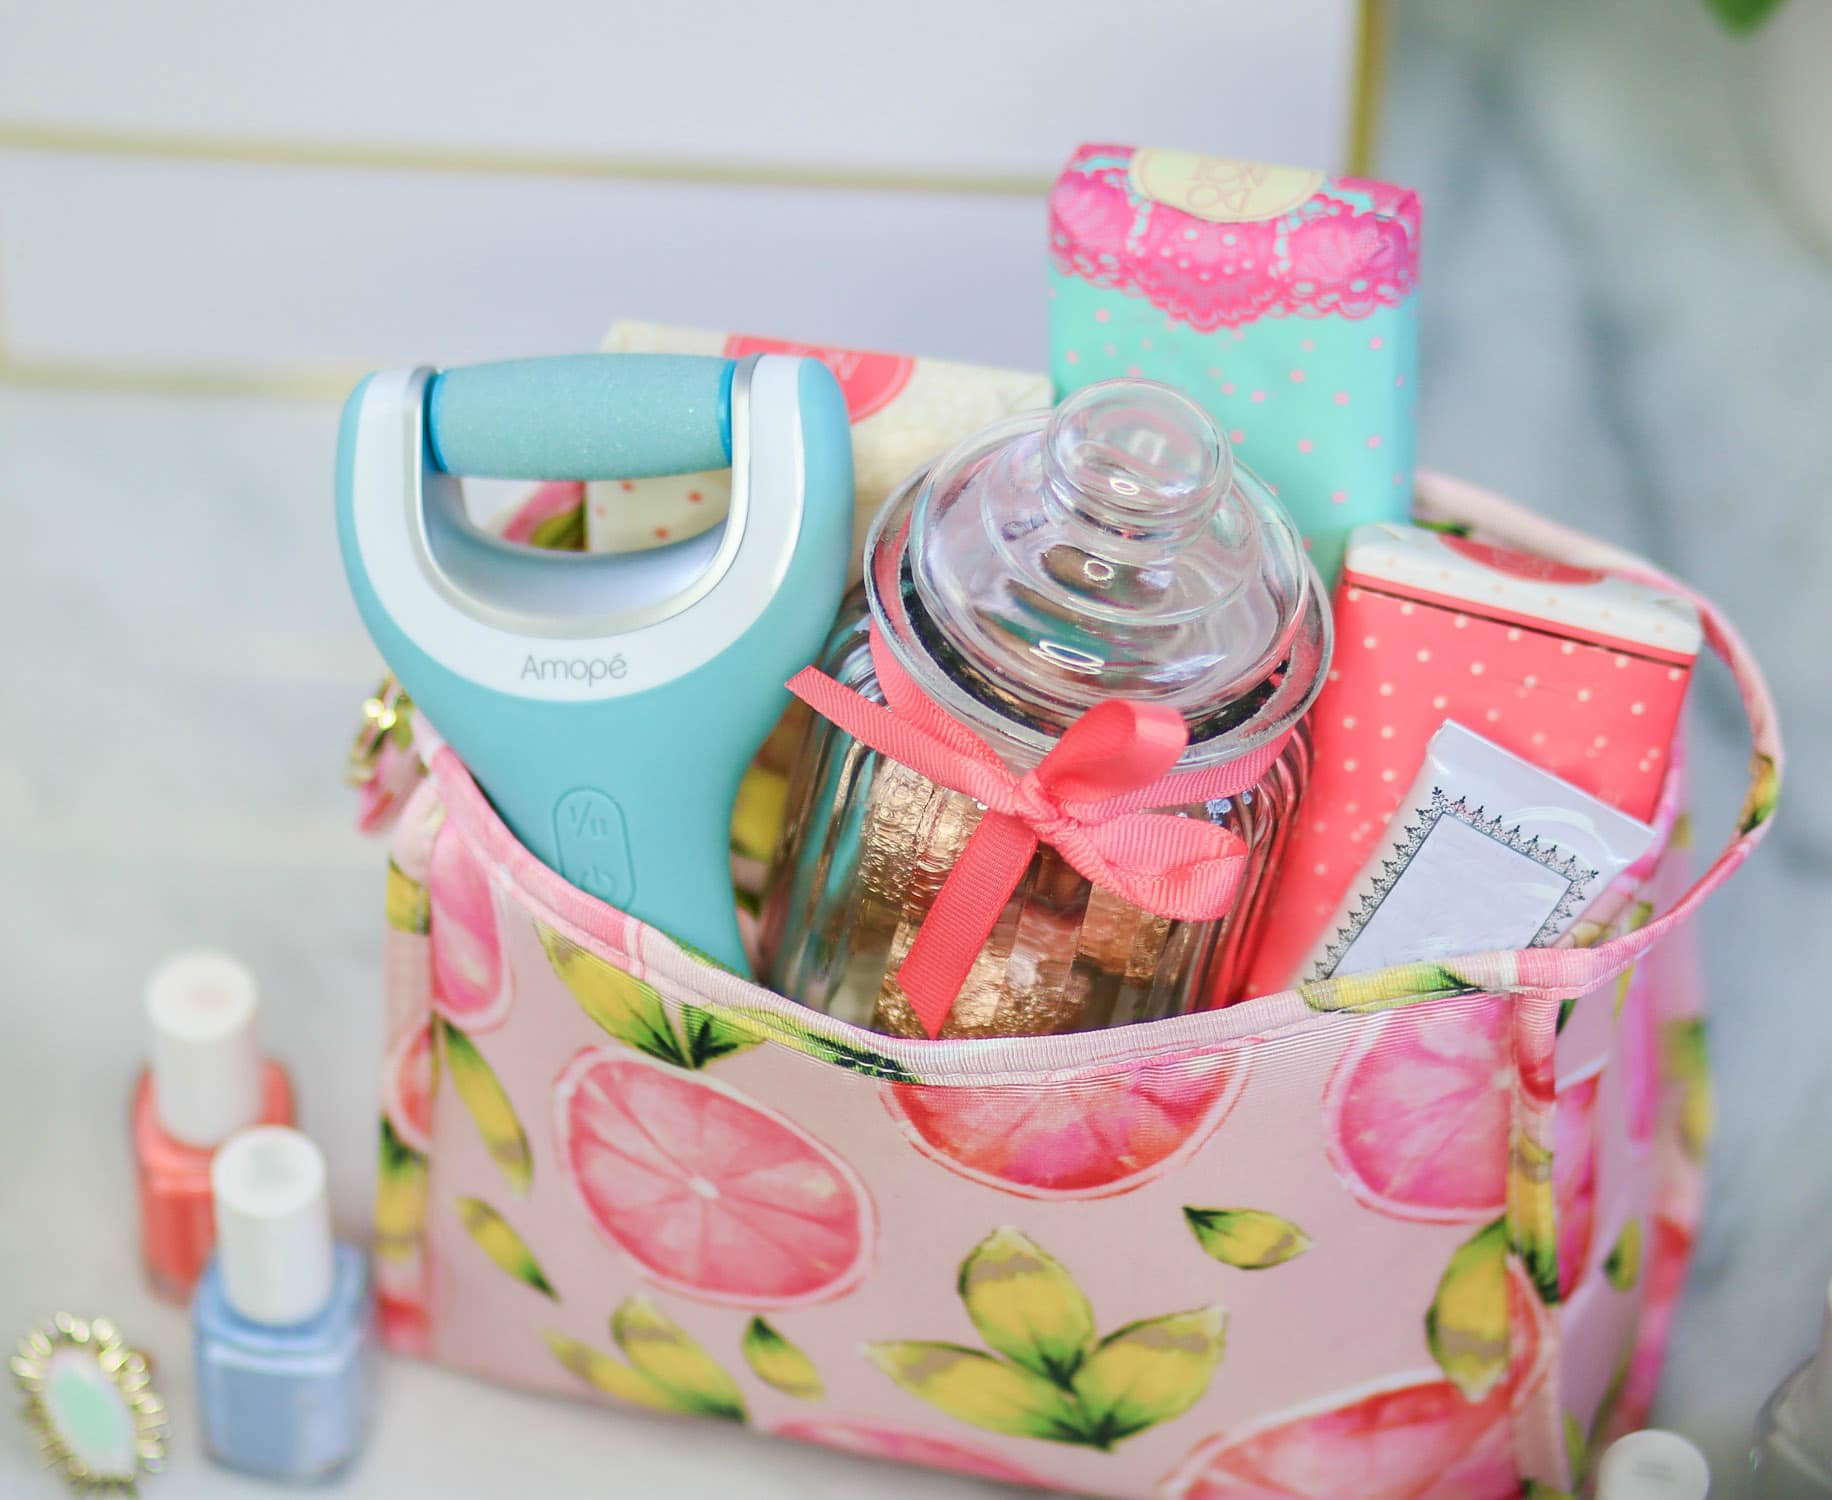 Diy Gift Ideas For Girls
 Cute Gift Ideas for Your Friends